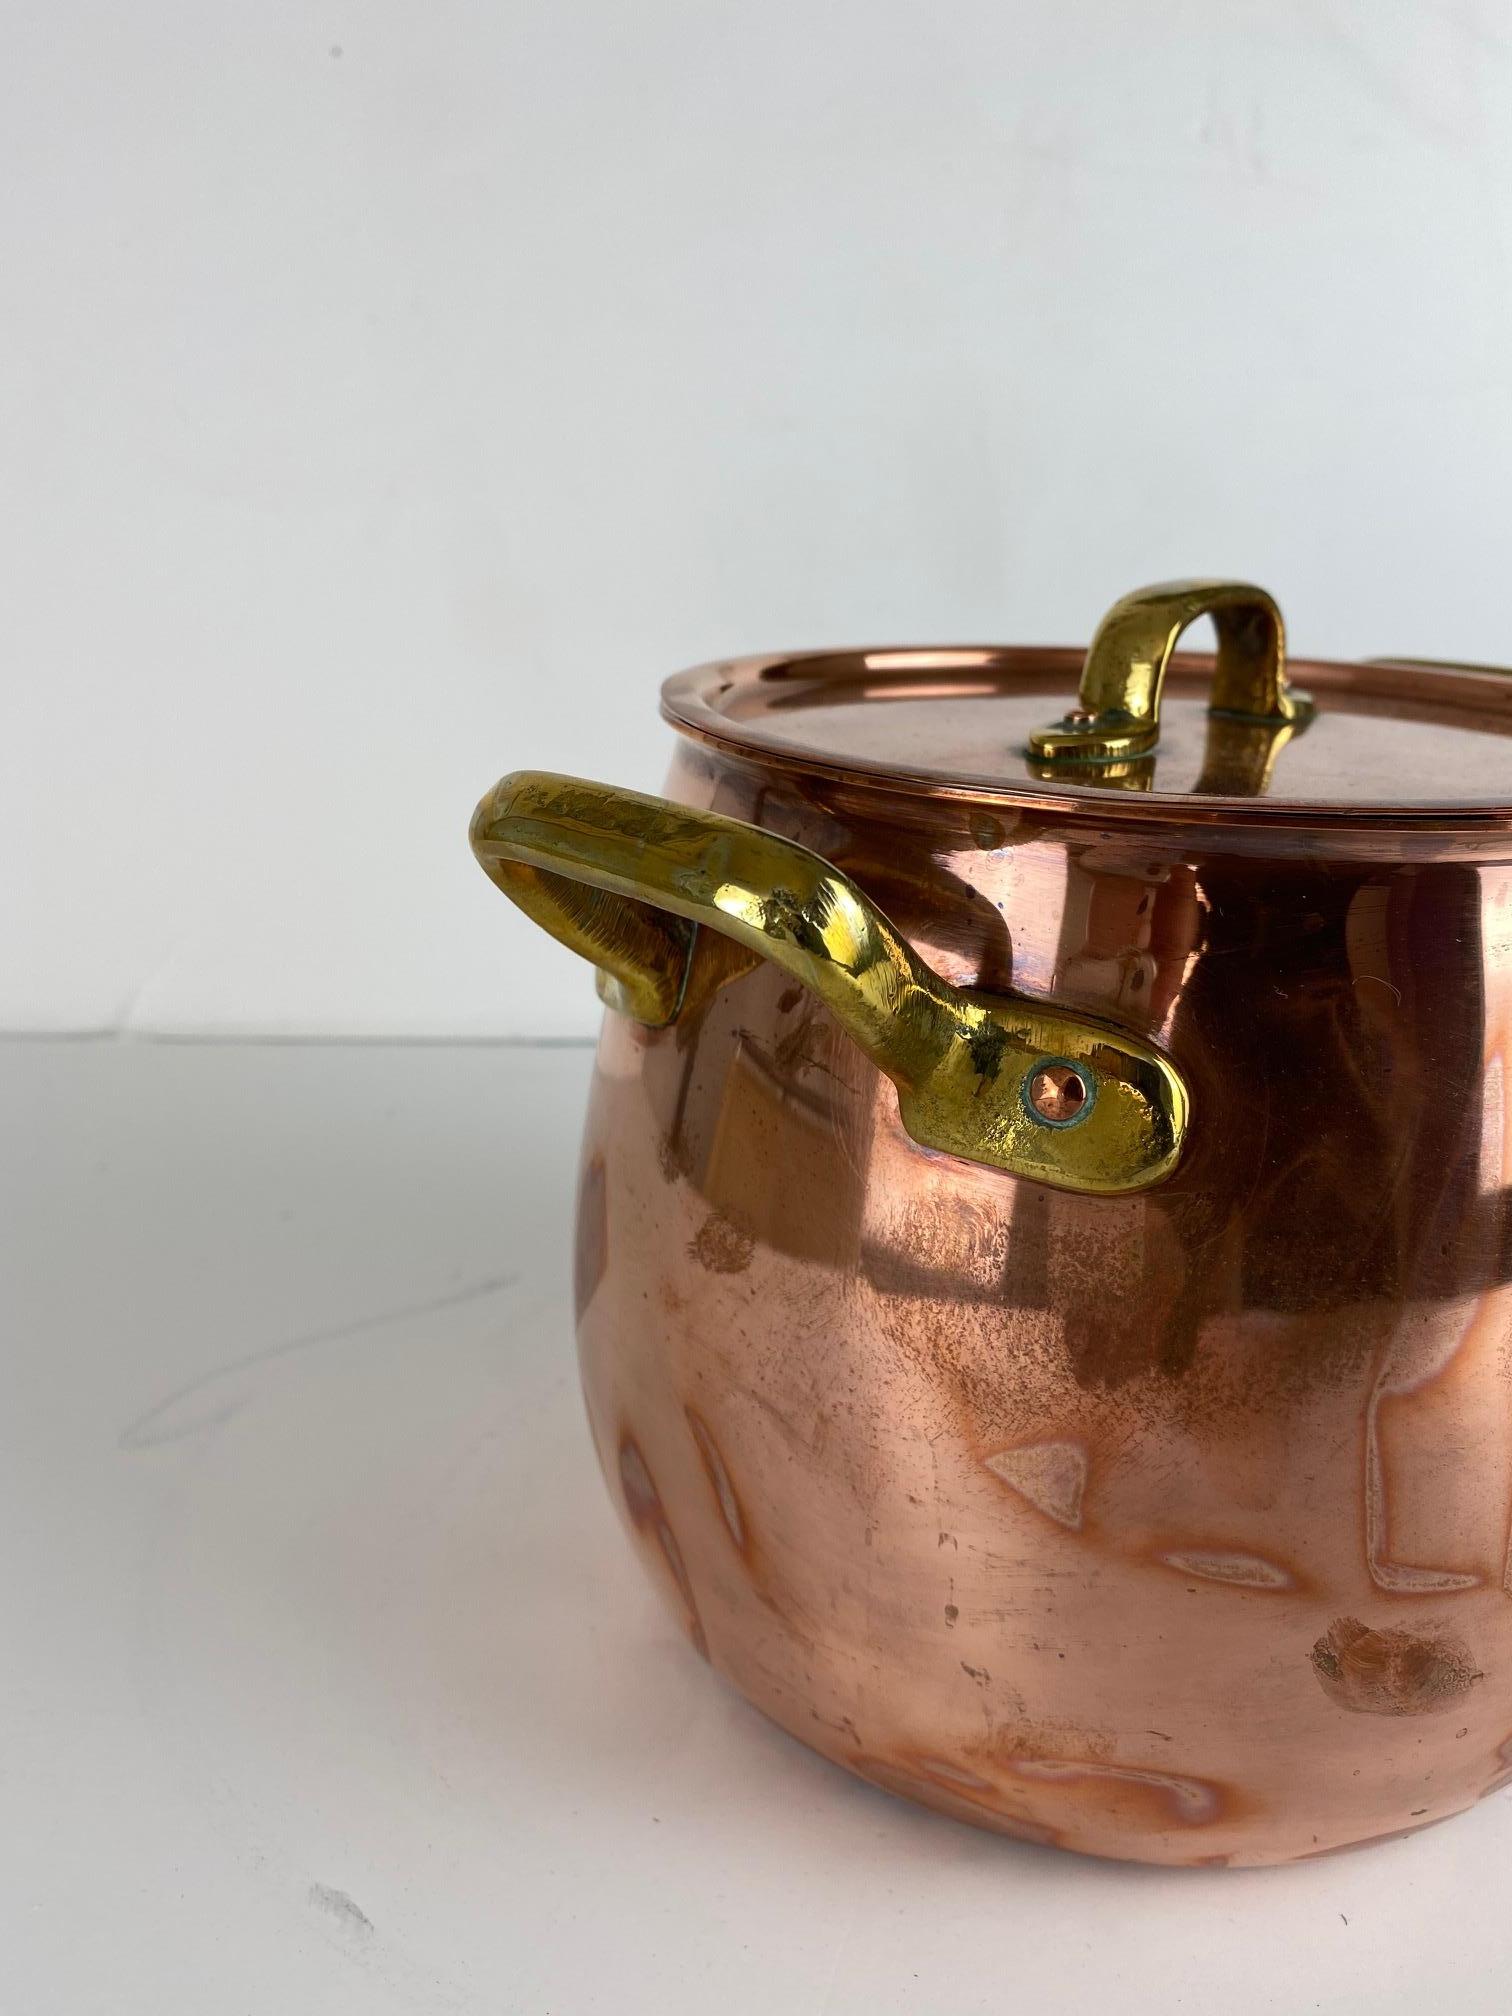 Copper pot with a lid. A brass handle on each side.